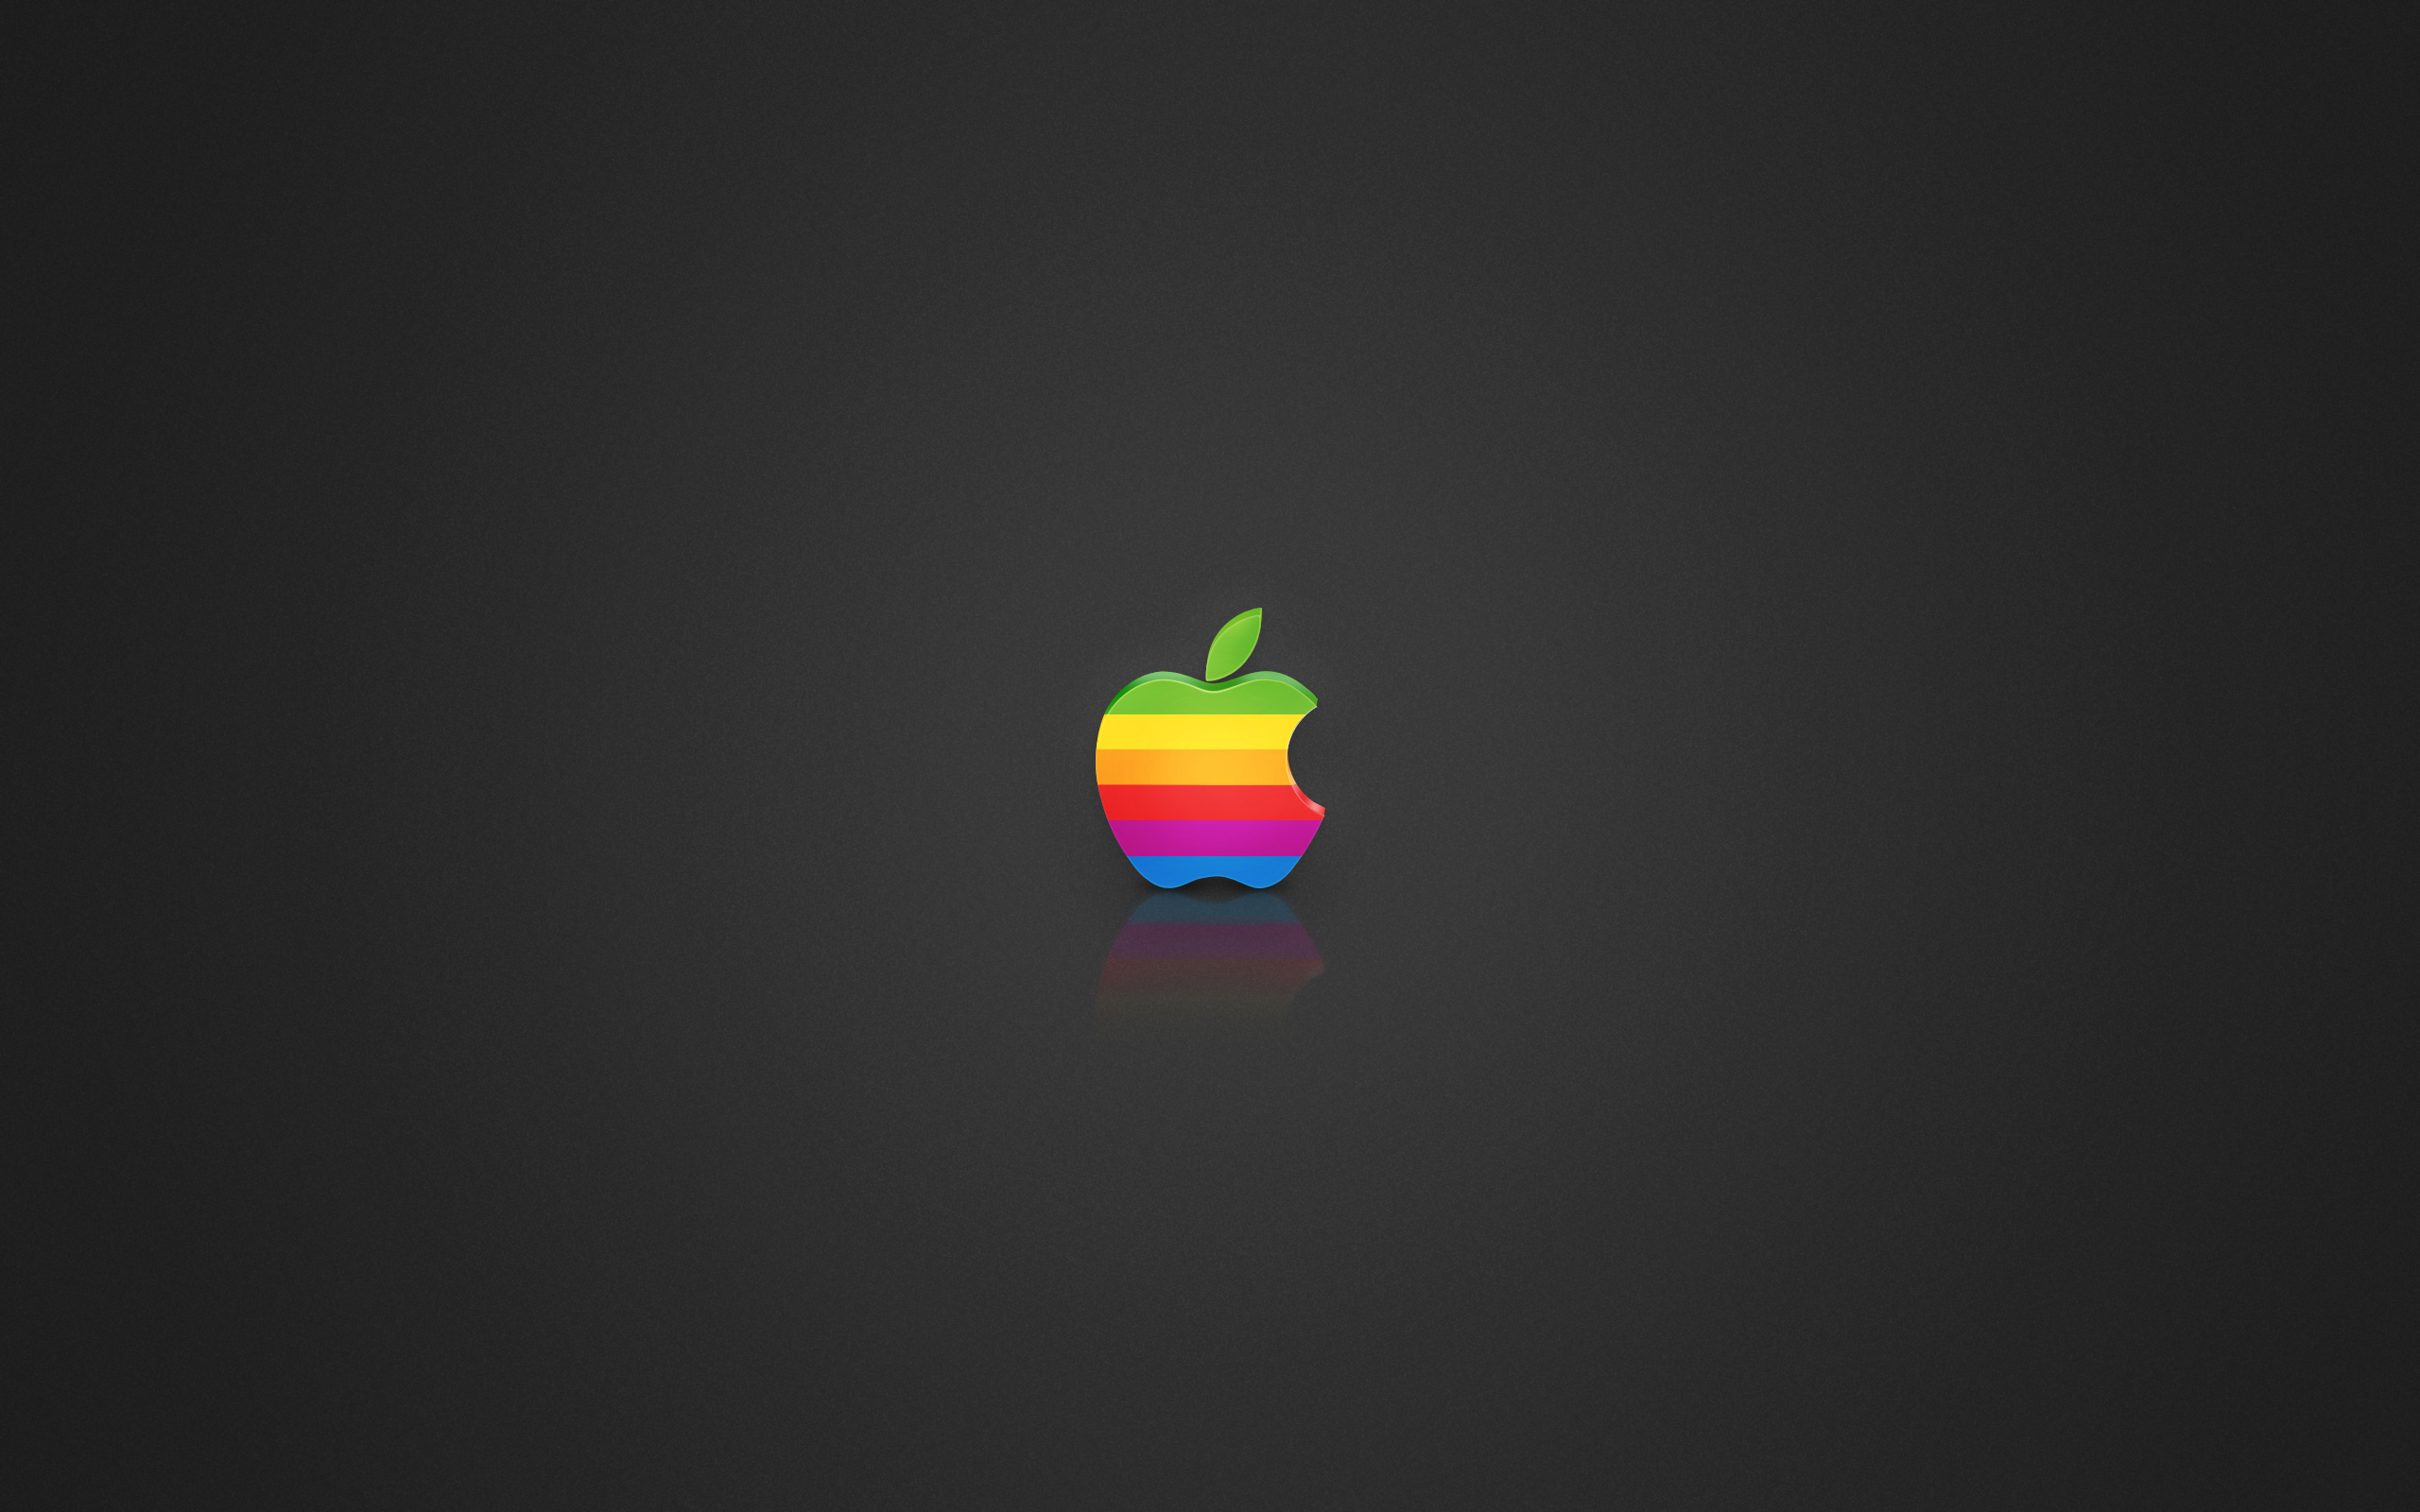 Coloured Apple logo YouTube Channel Cover